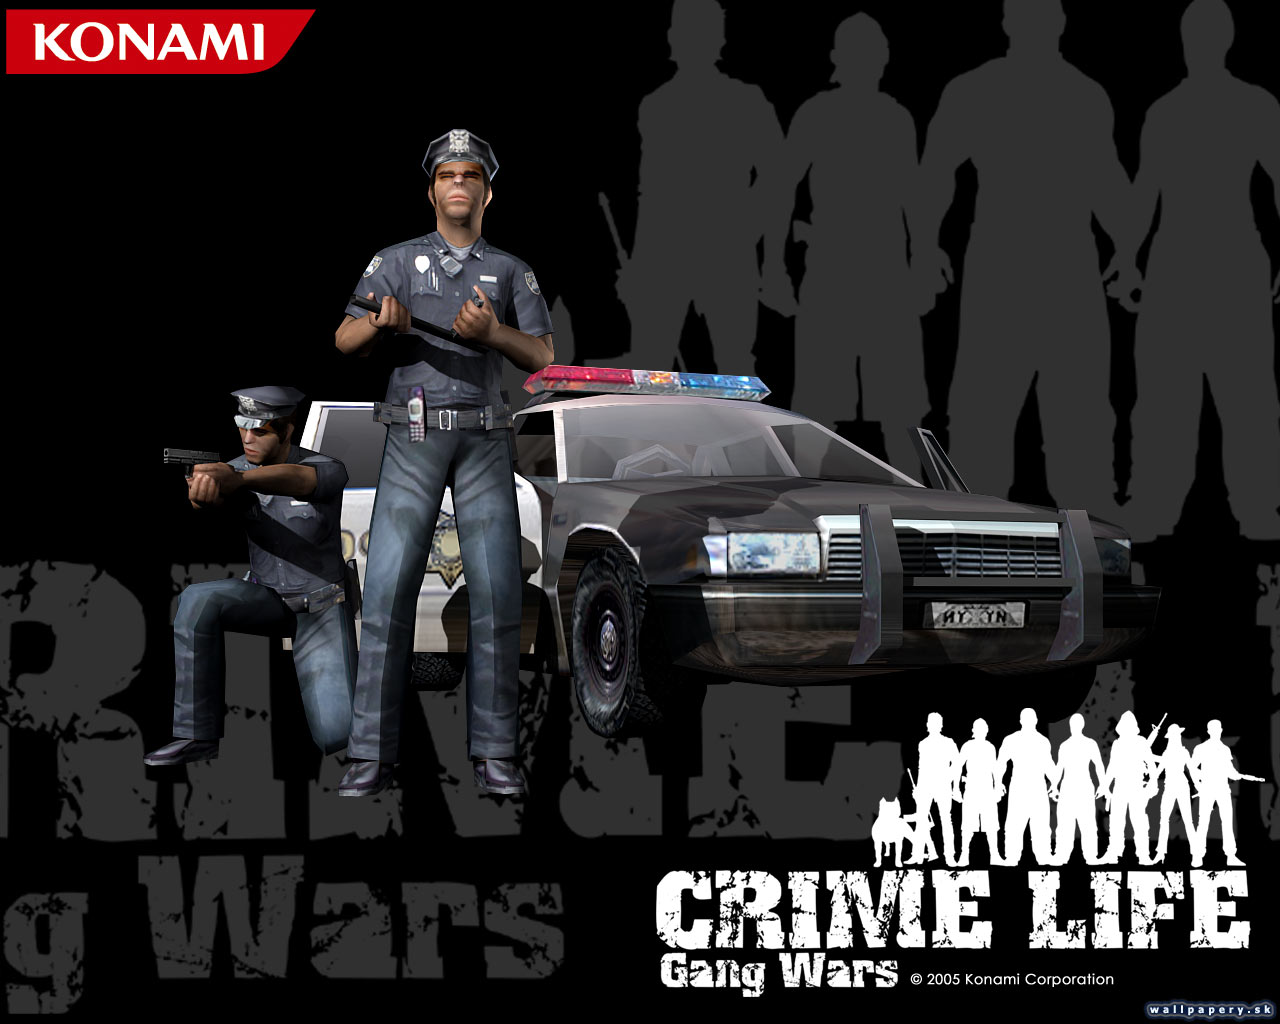 Life is crime